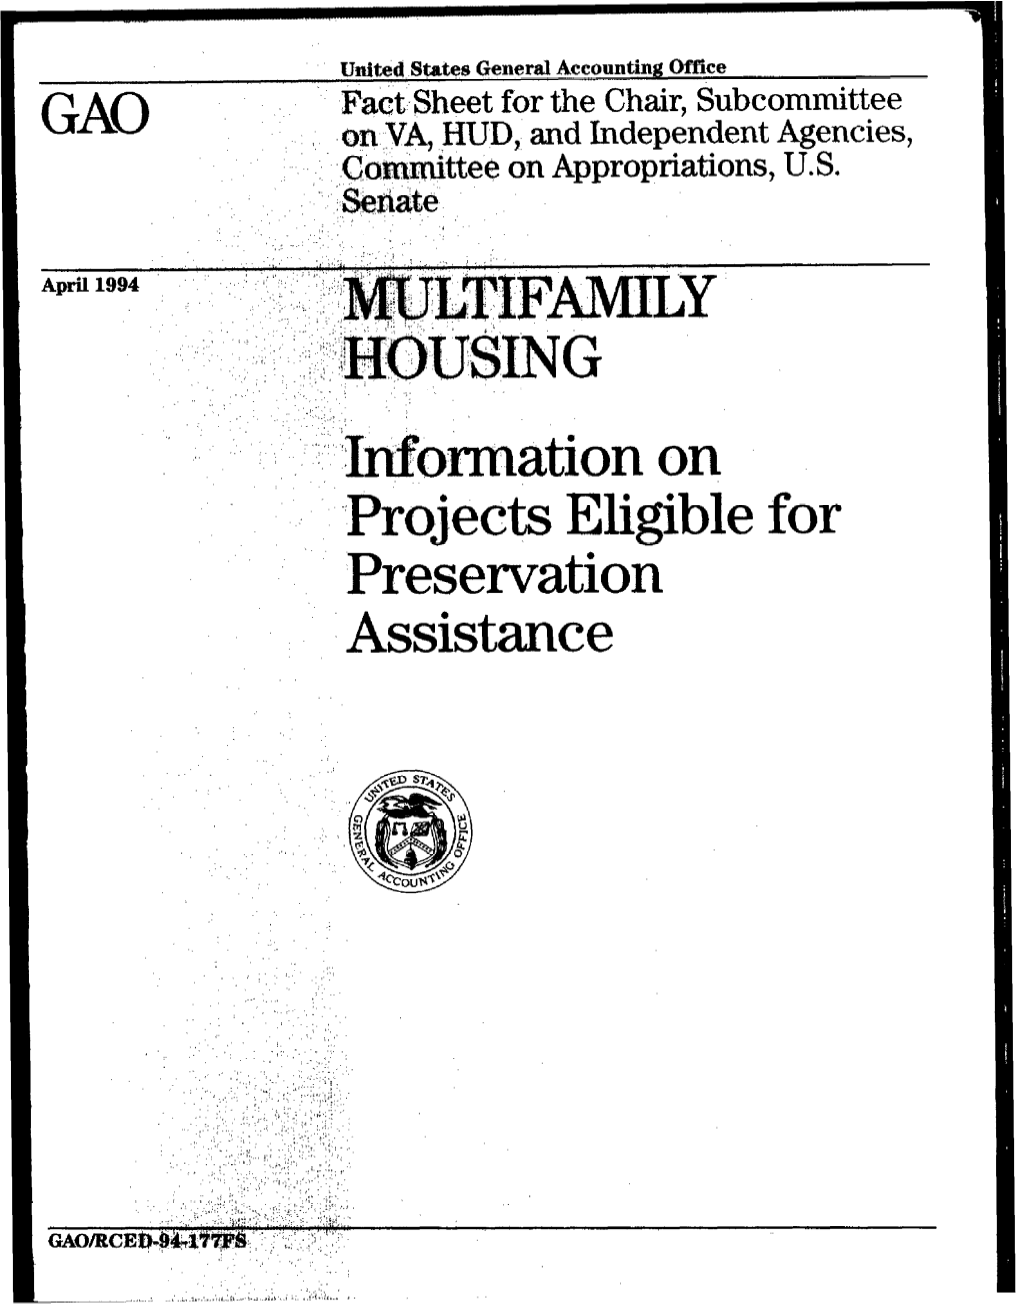 RCED-94-177FS Multifamily Housing